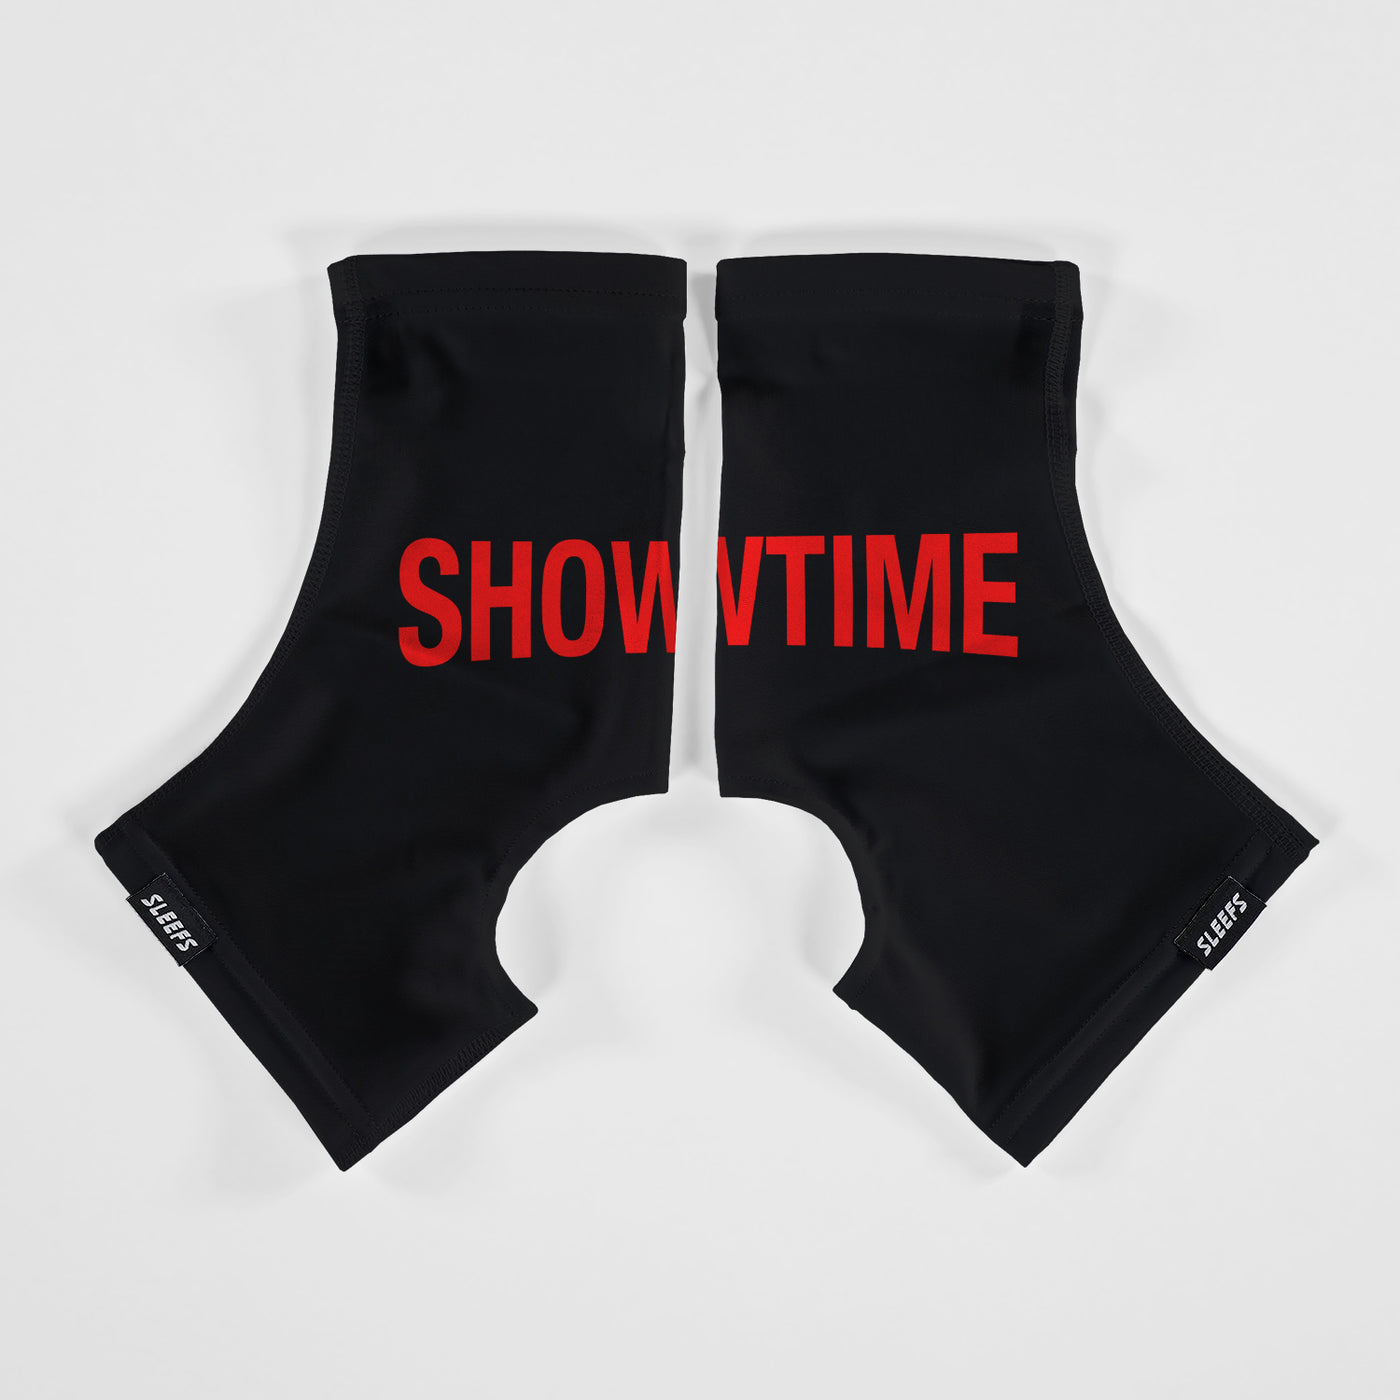 Showtime Black Spats / Cleat Covers